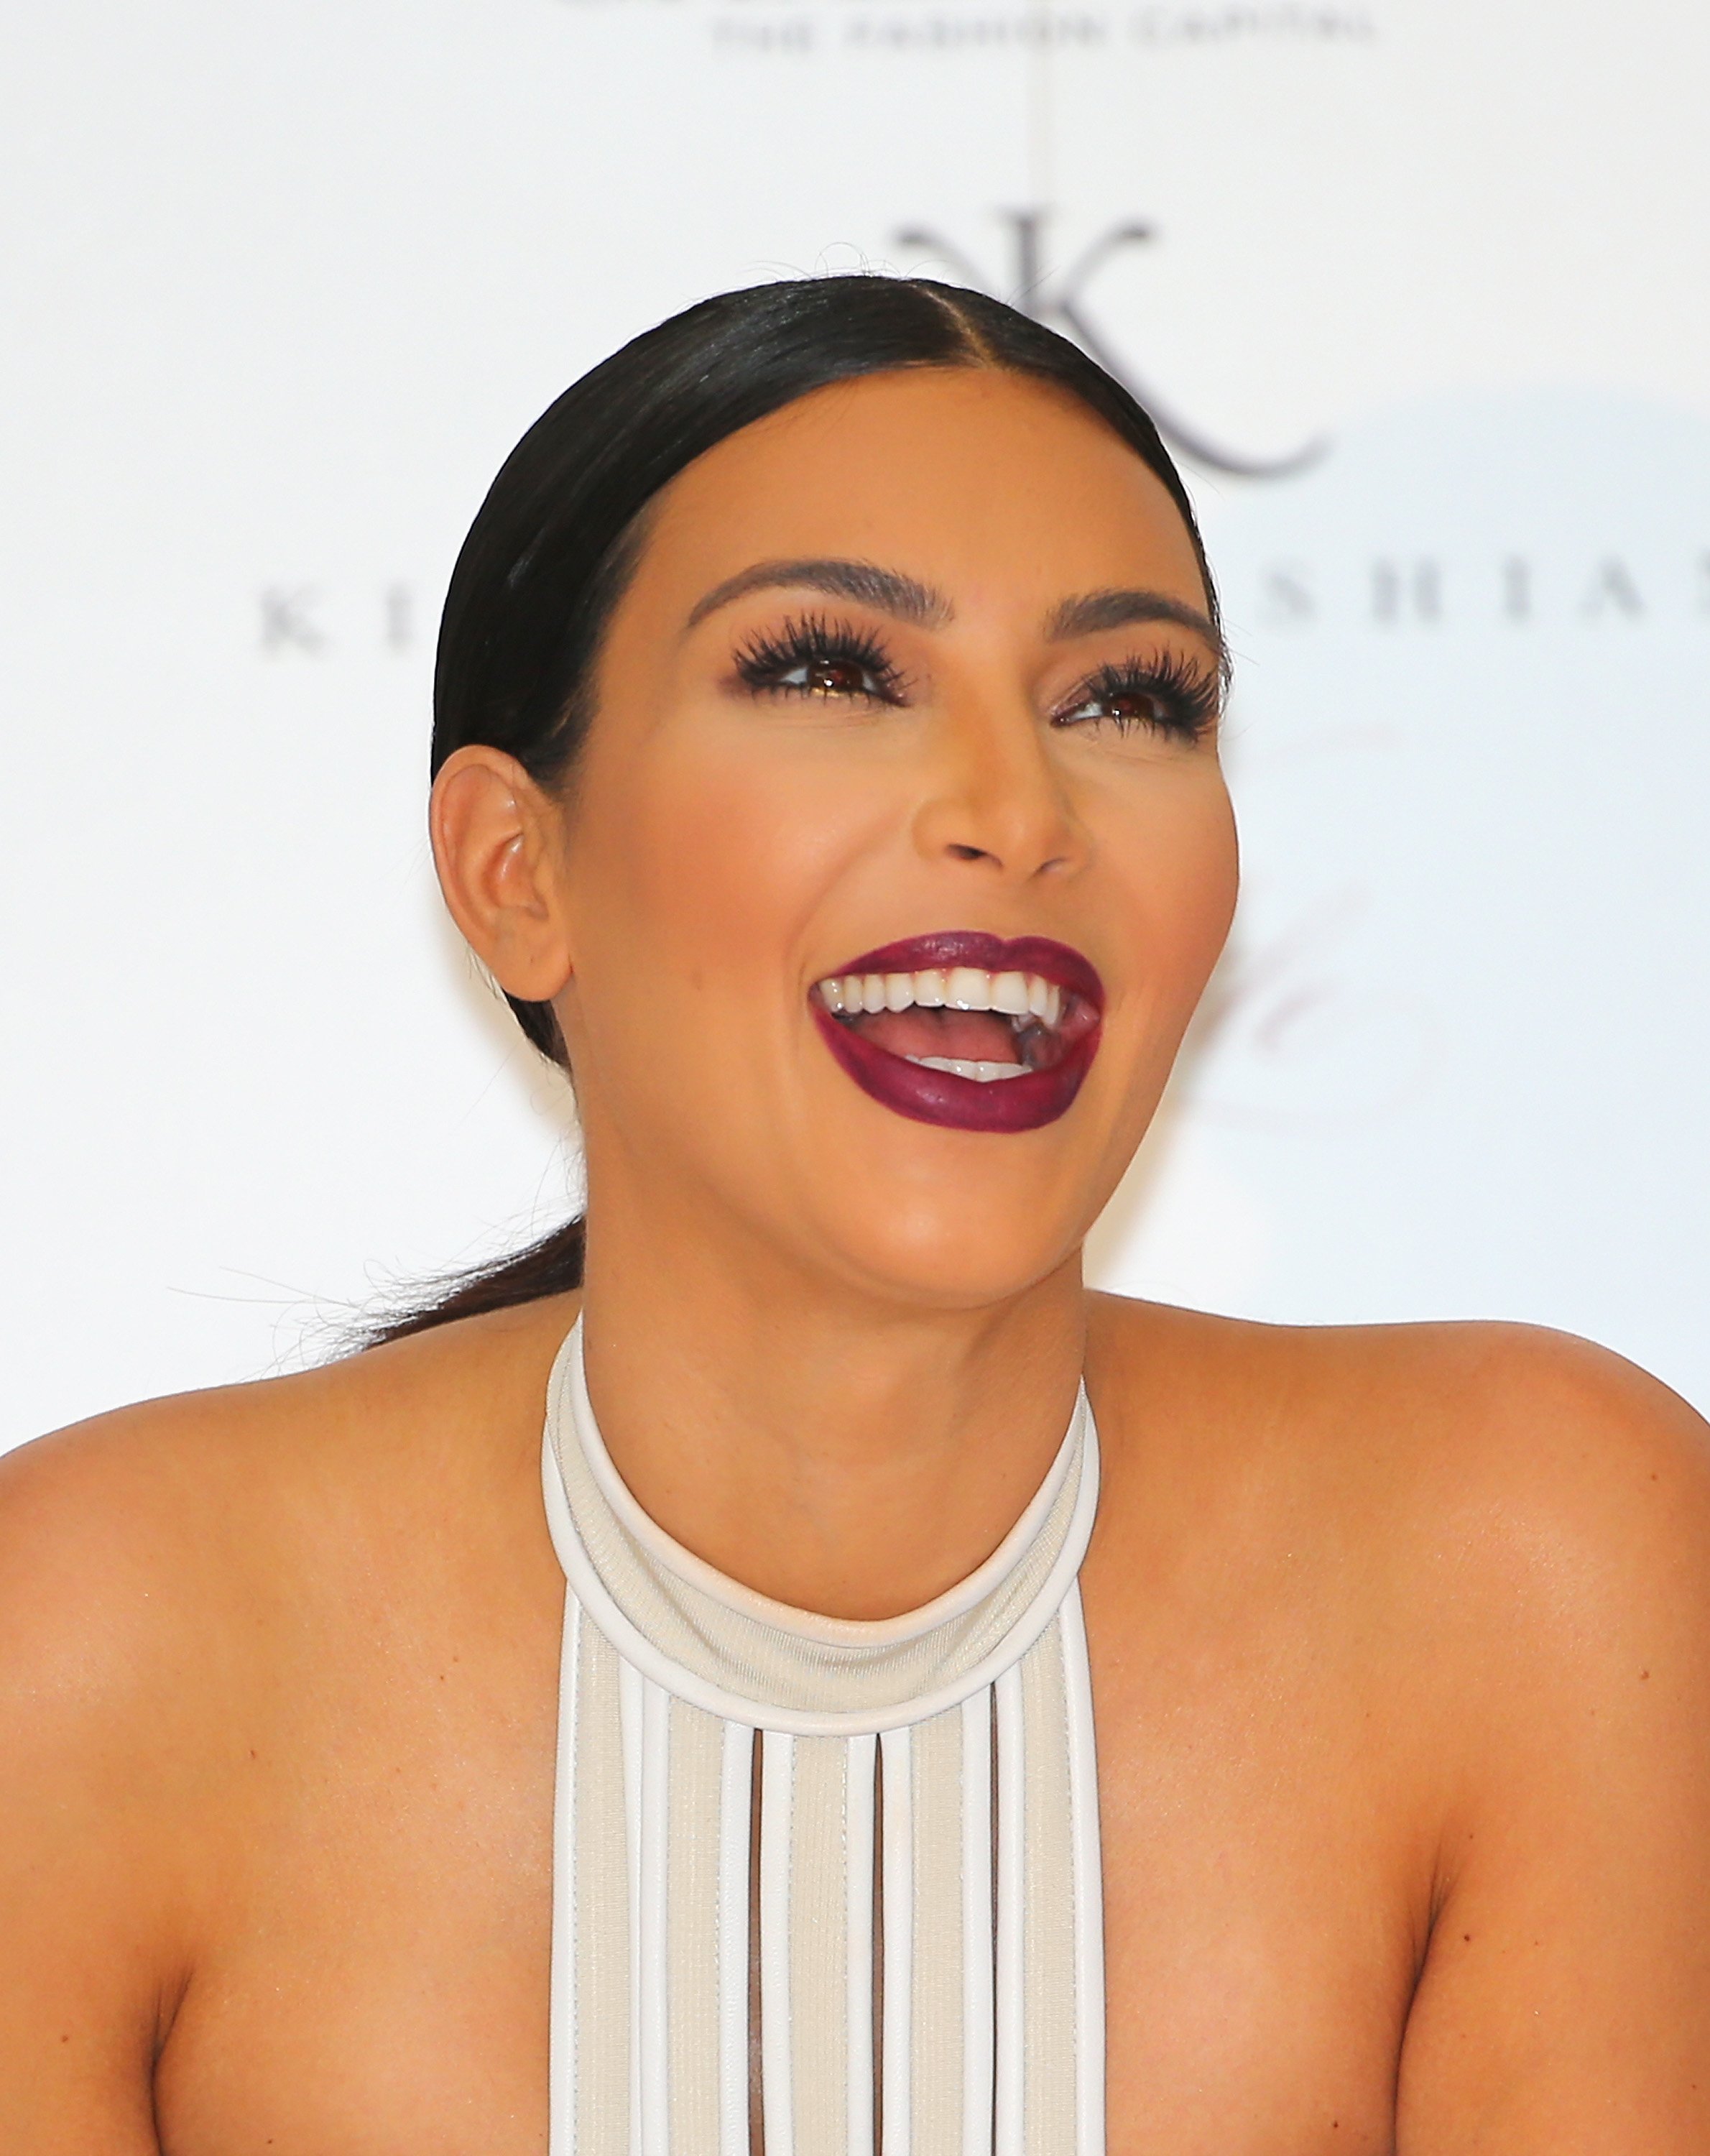 Kim Kardashian laughs as she promotes her new fragrance "Fleur Fatale" at Chadstone Shopping Center | Source: Getty Images